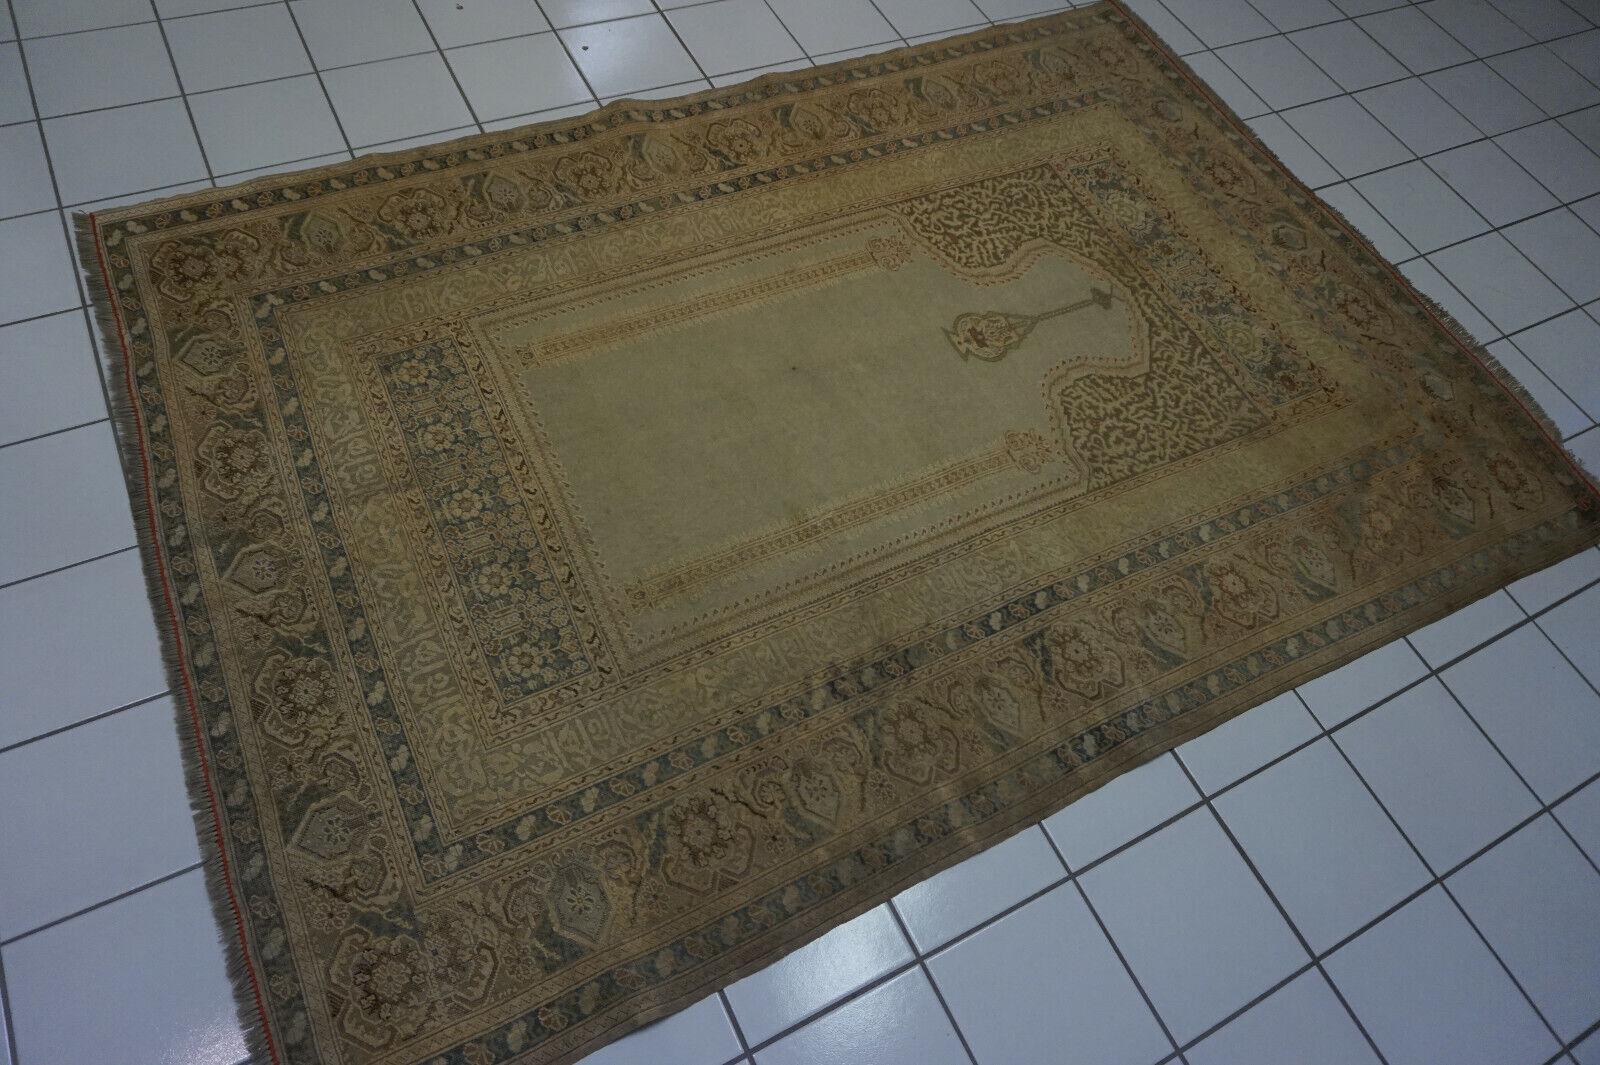 Handmade Antique Turkish Transilvania Prayer Rug 4.2' x 6.2', 1880s - 1D65 In Good Condition For Sale In Bordeaux, FR